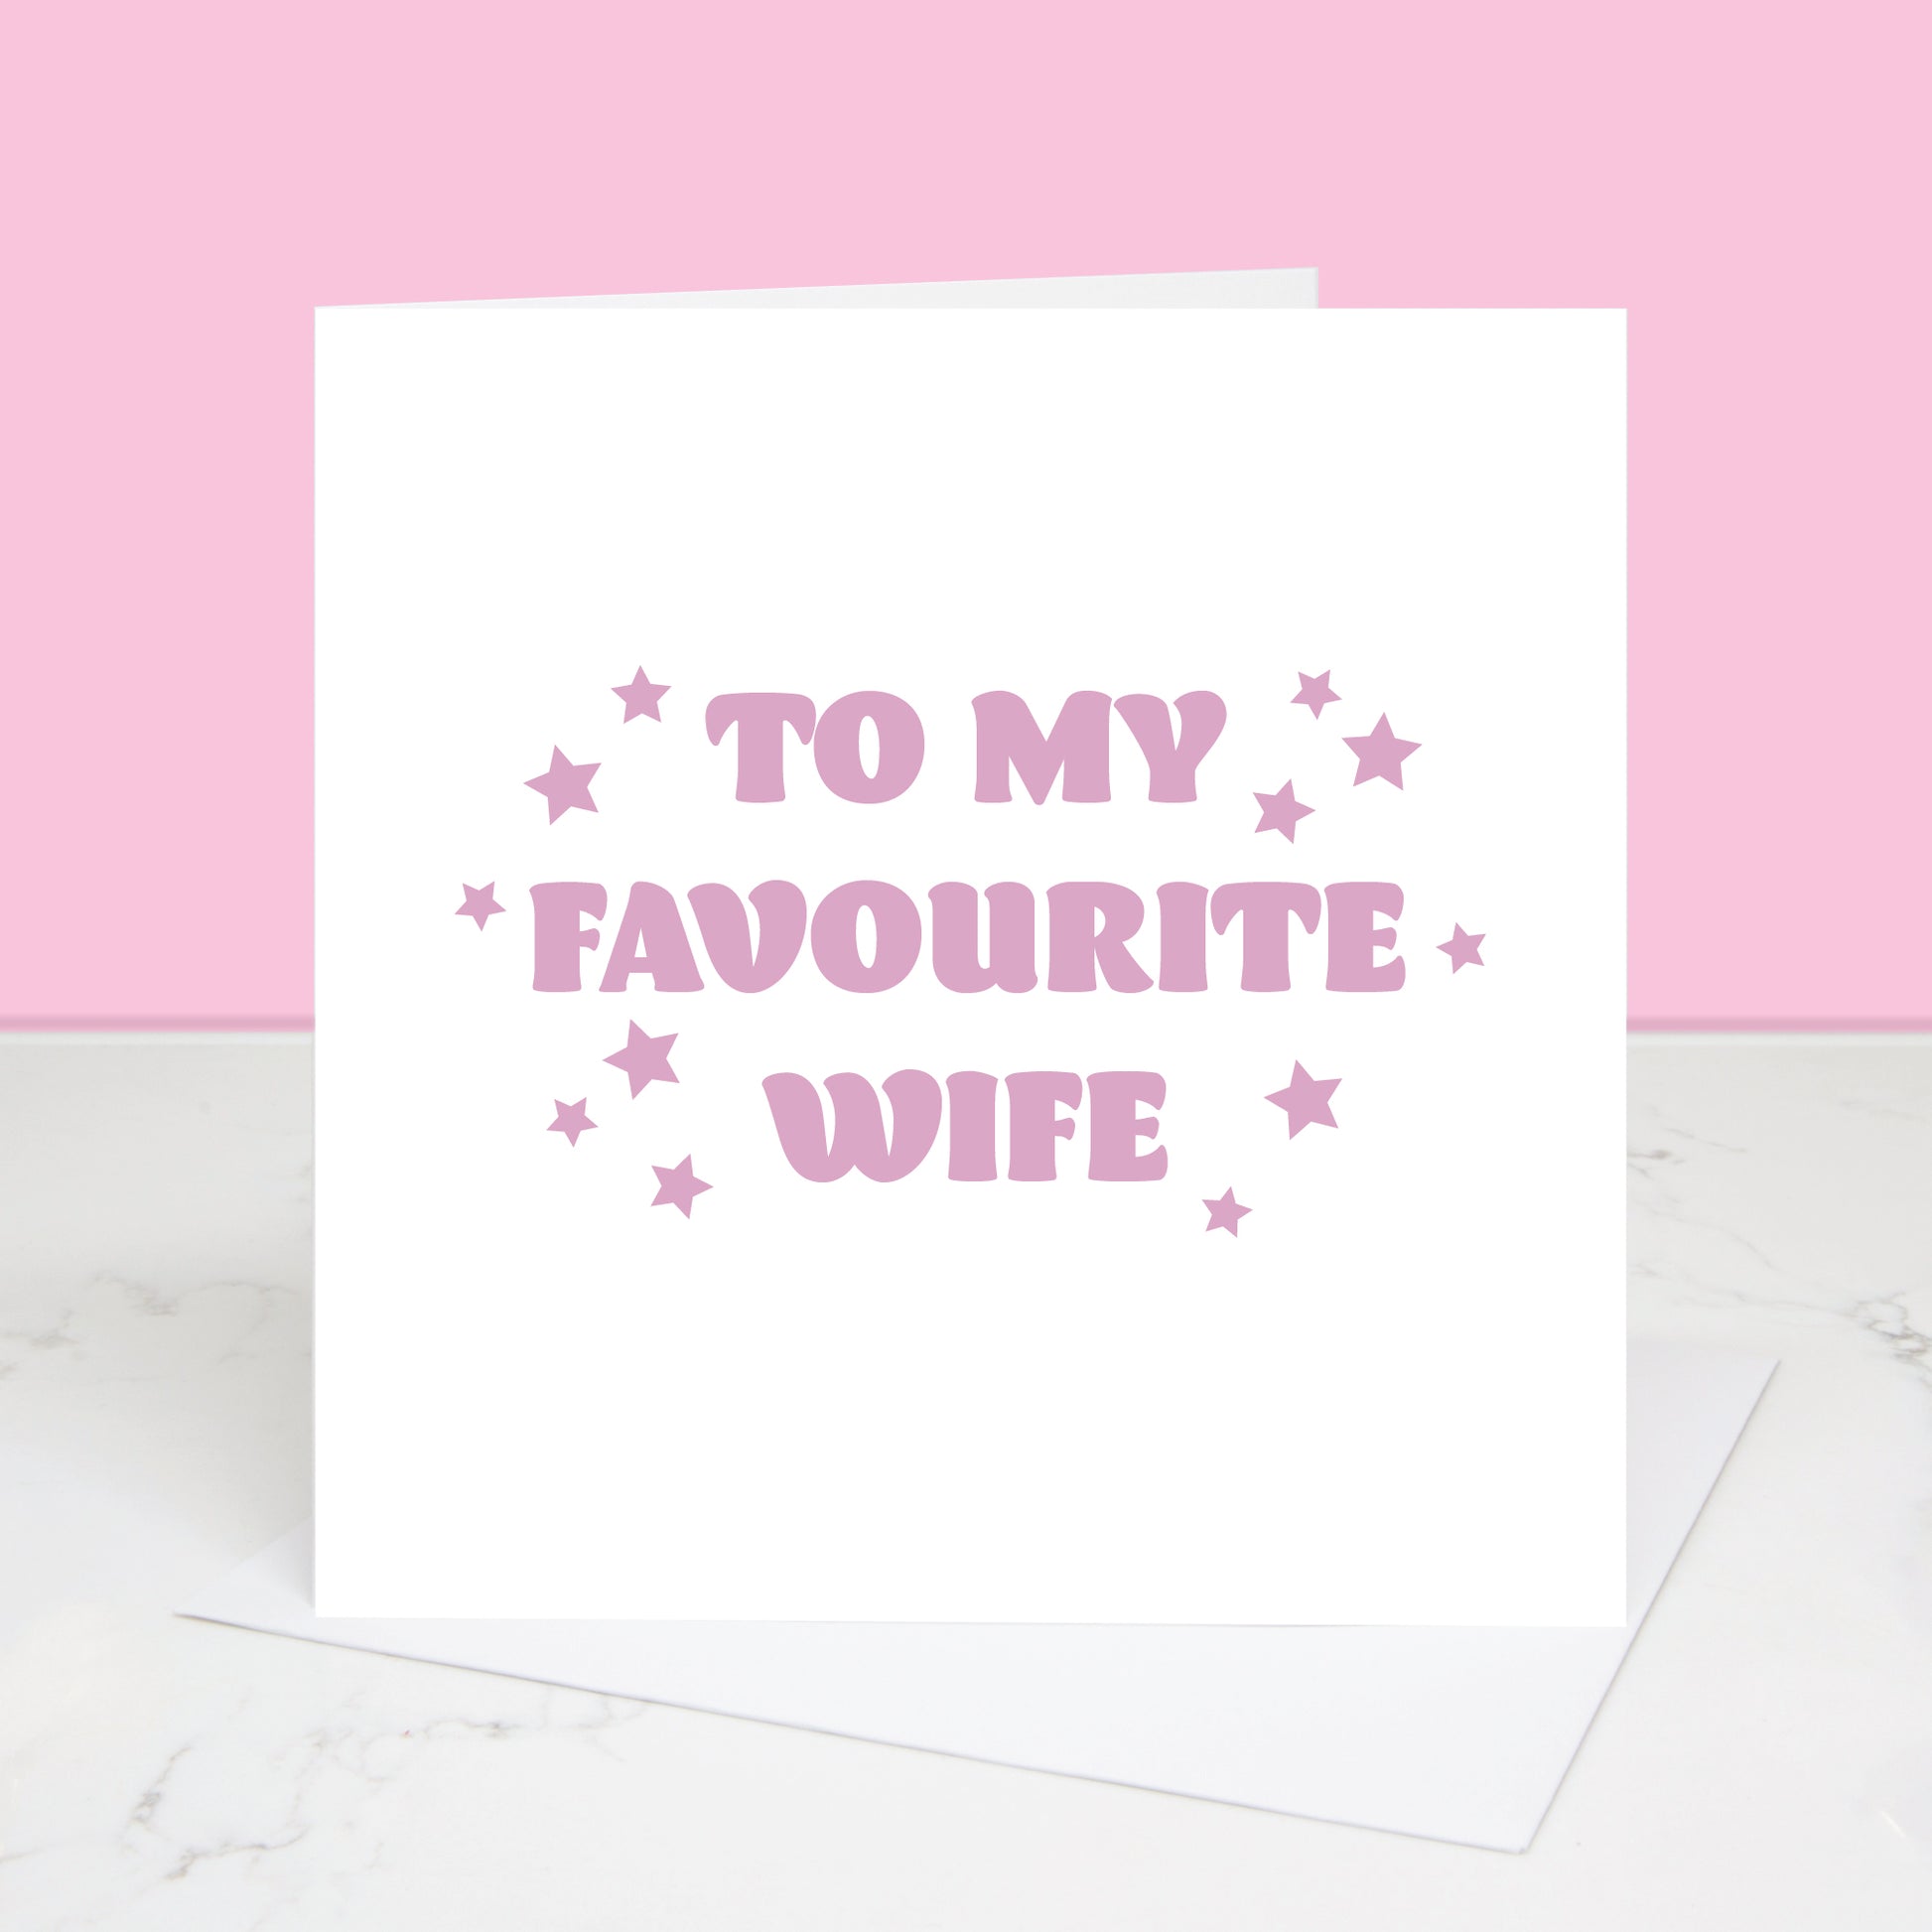 My Favourite Wife Valentine's Day Card in dusky pink. All images and designs © Slice of Pie Designs